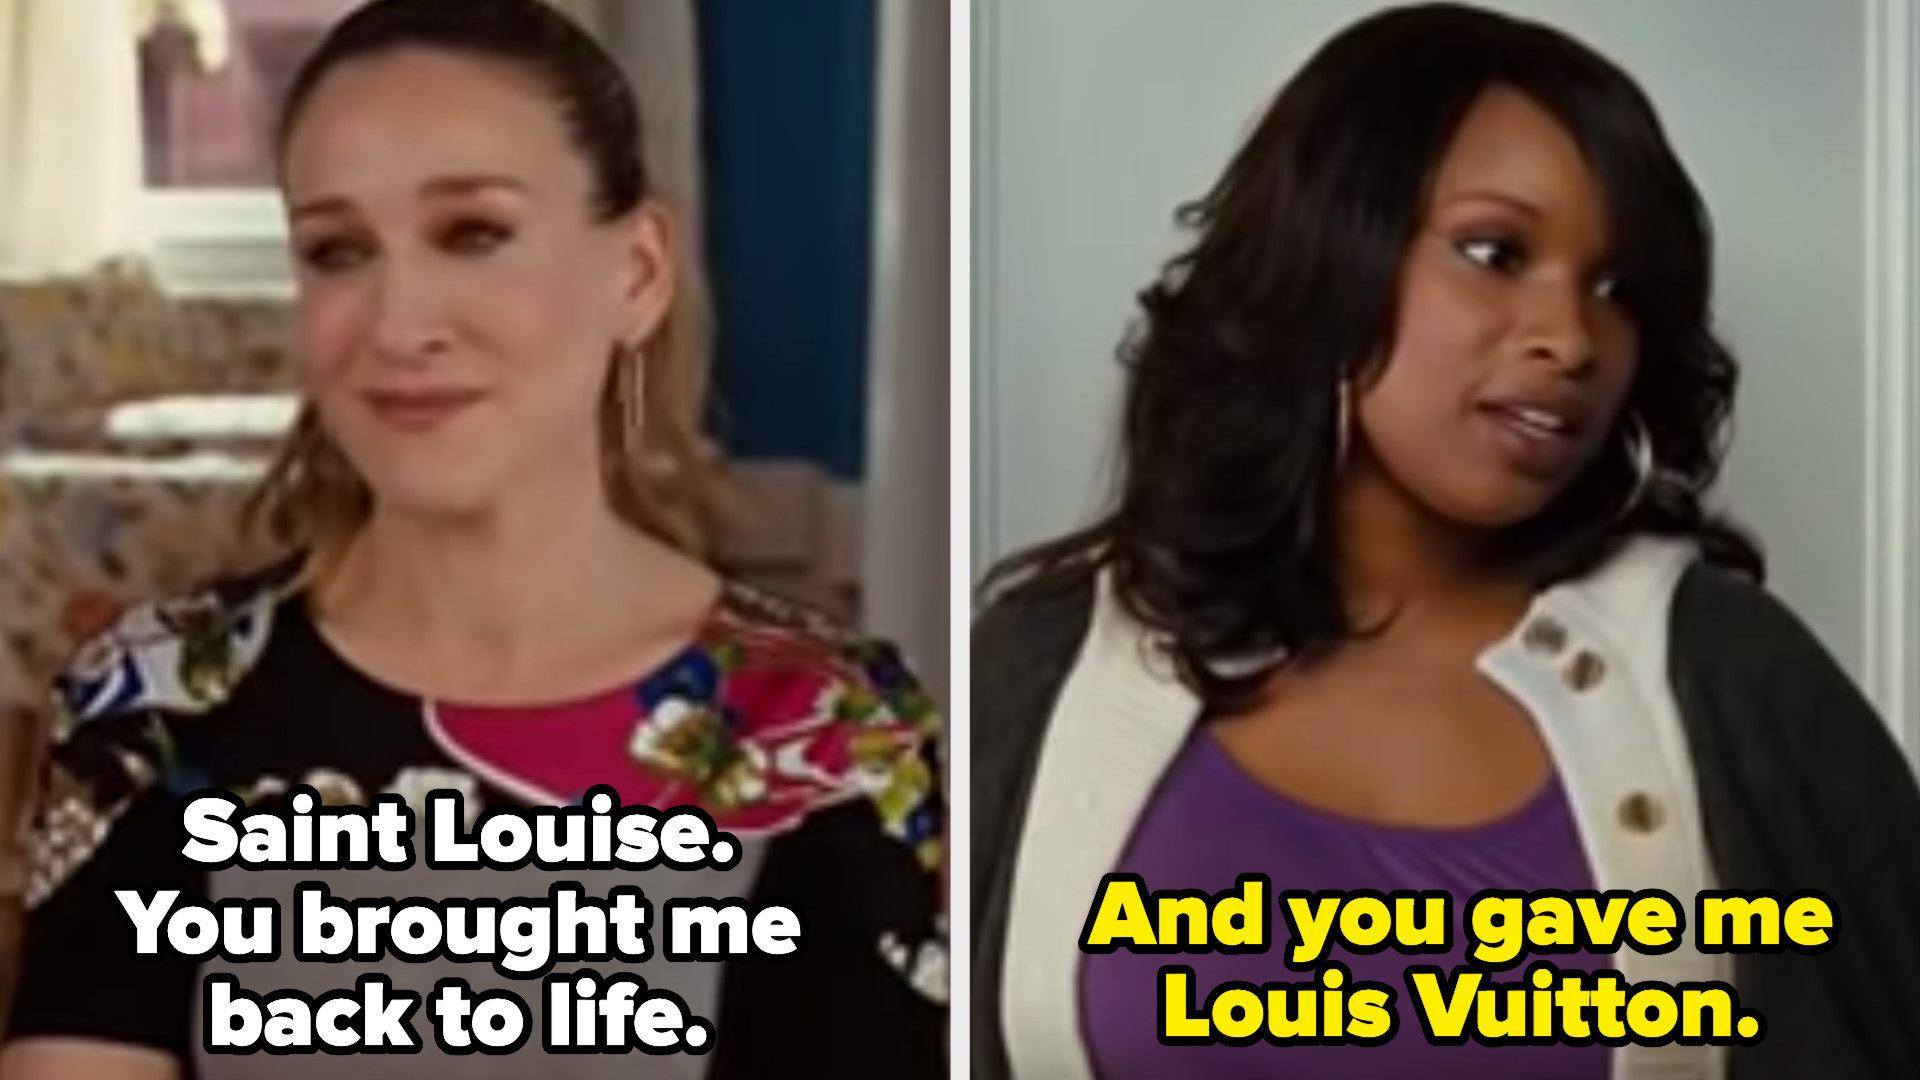 Carrie thanking Louise in her apartment before Louise moves back down south. Carrie: &quot;Saint Louise. You brought me back to life.&quot; Louise: &quot;And you gave me Louis Vuitton&quot;